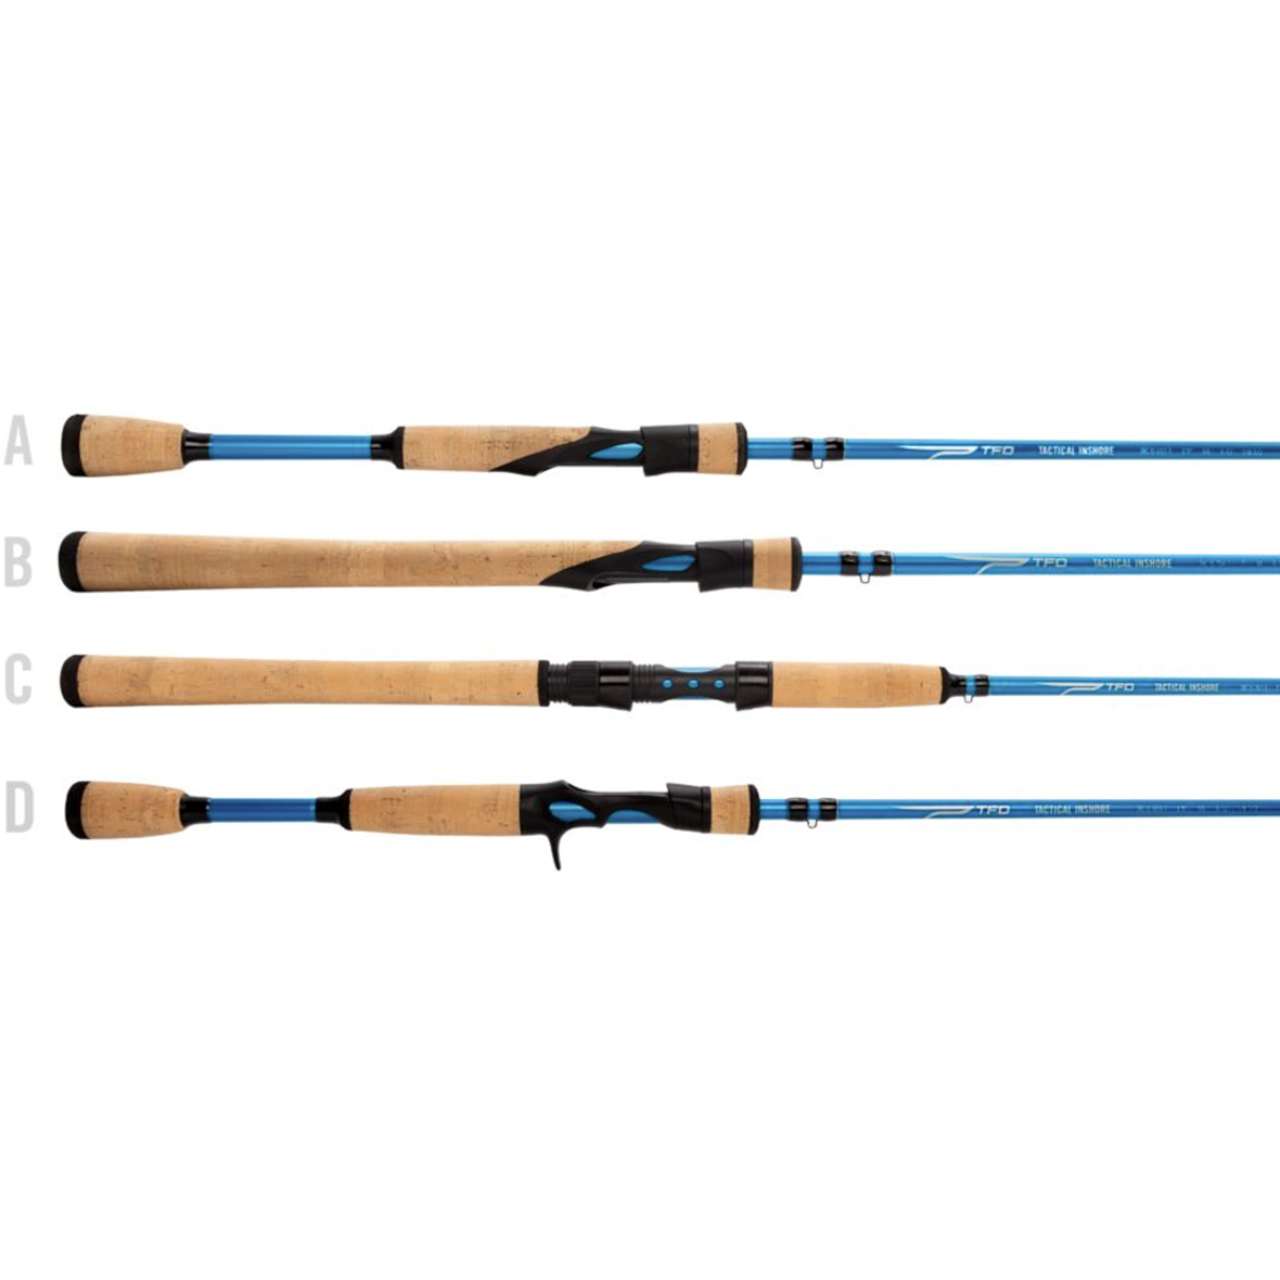 Spring fishing is - TFO Rods - Temple Fork Outfitters